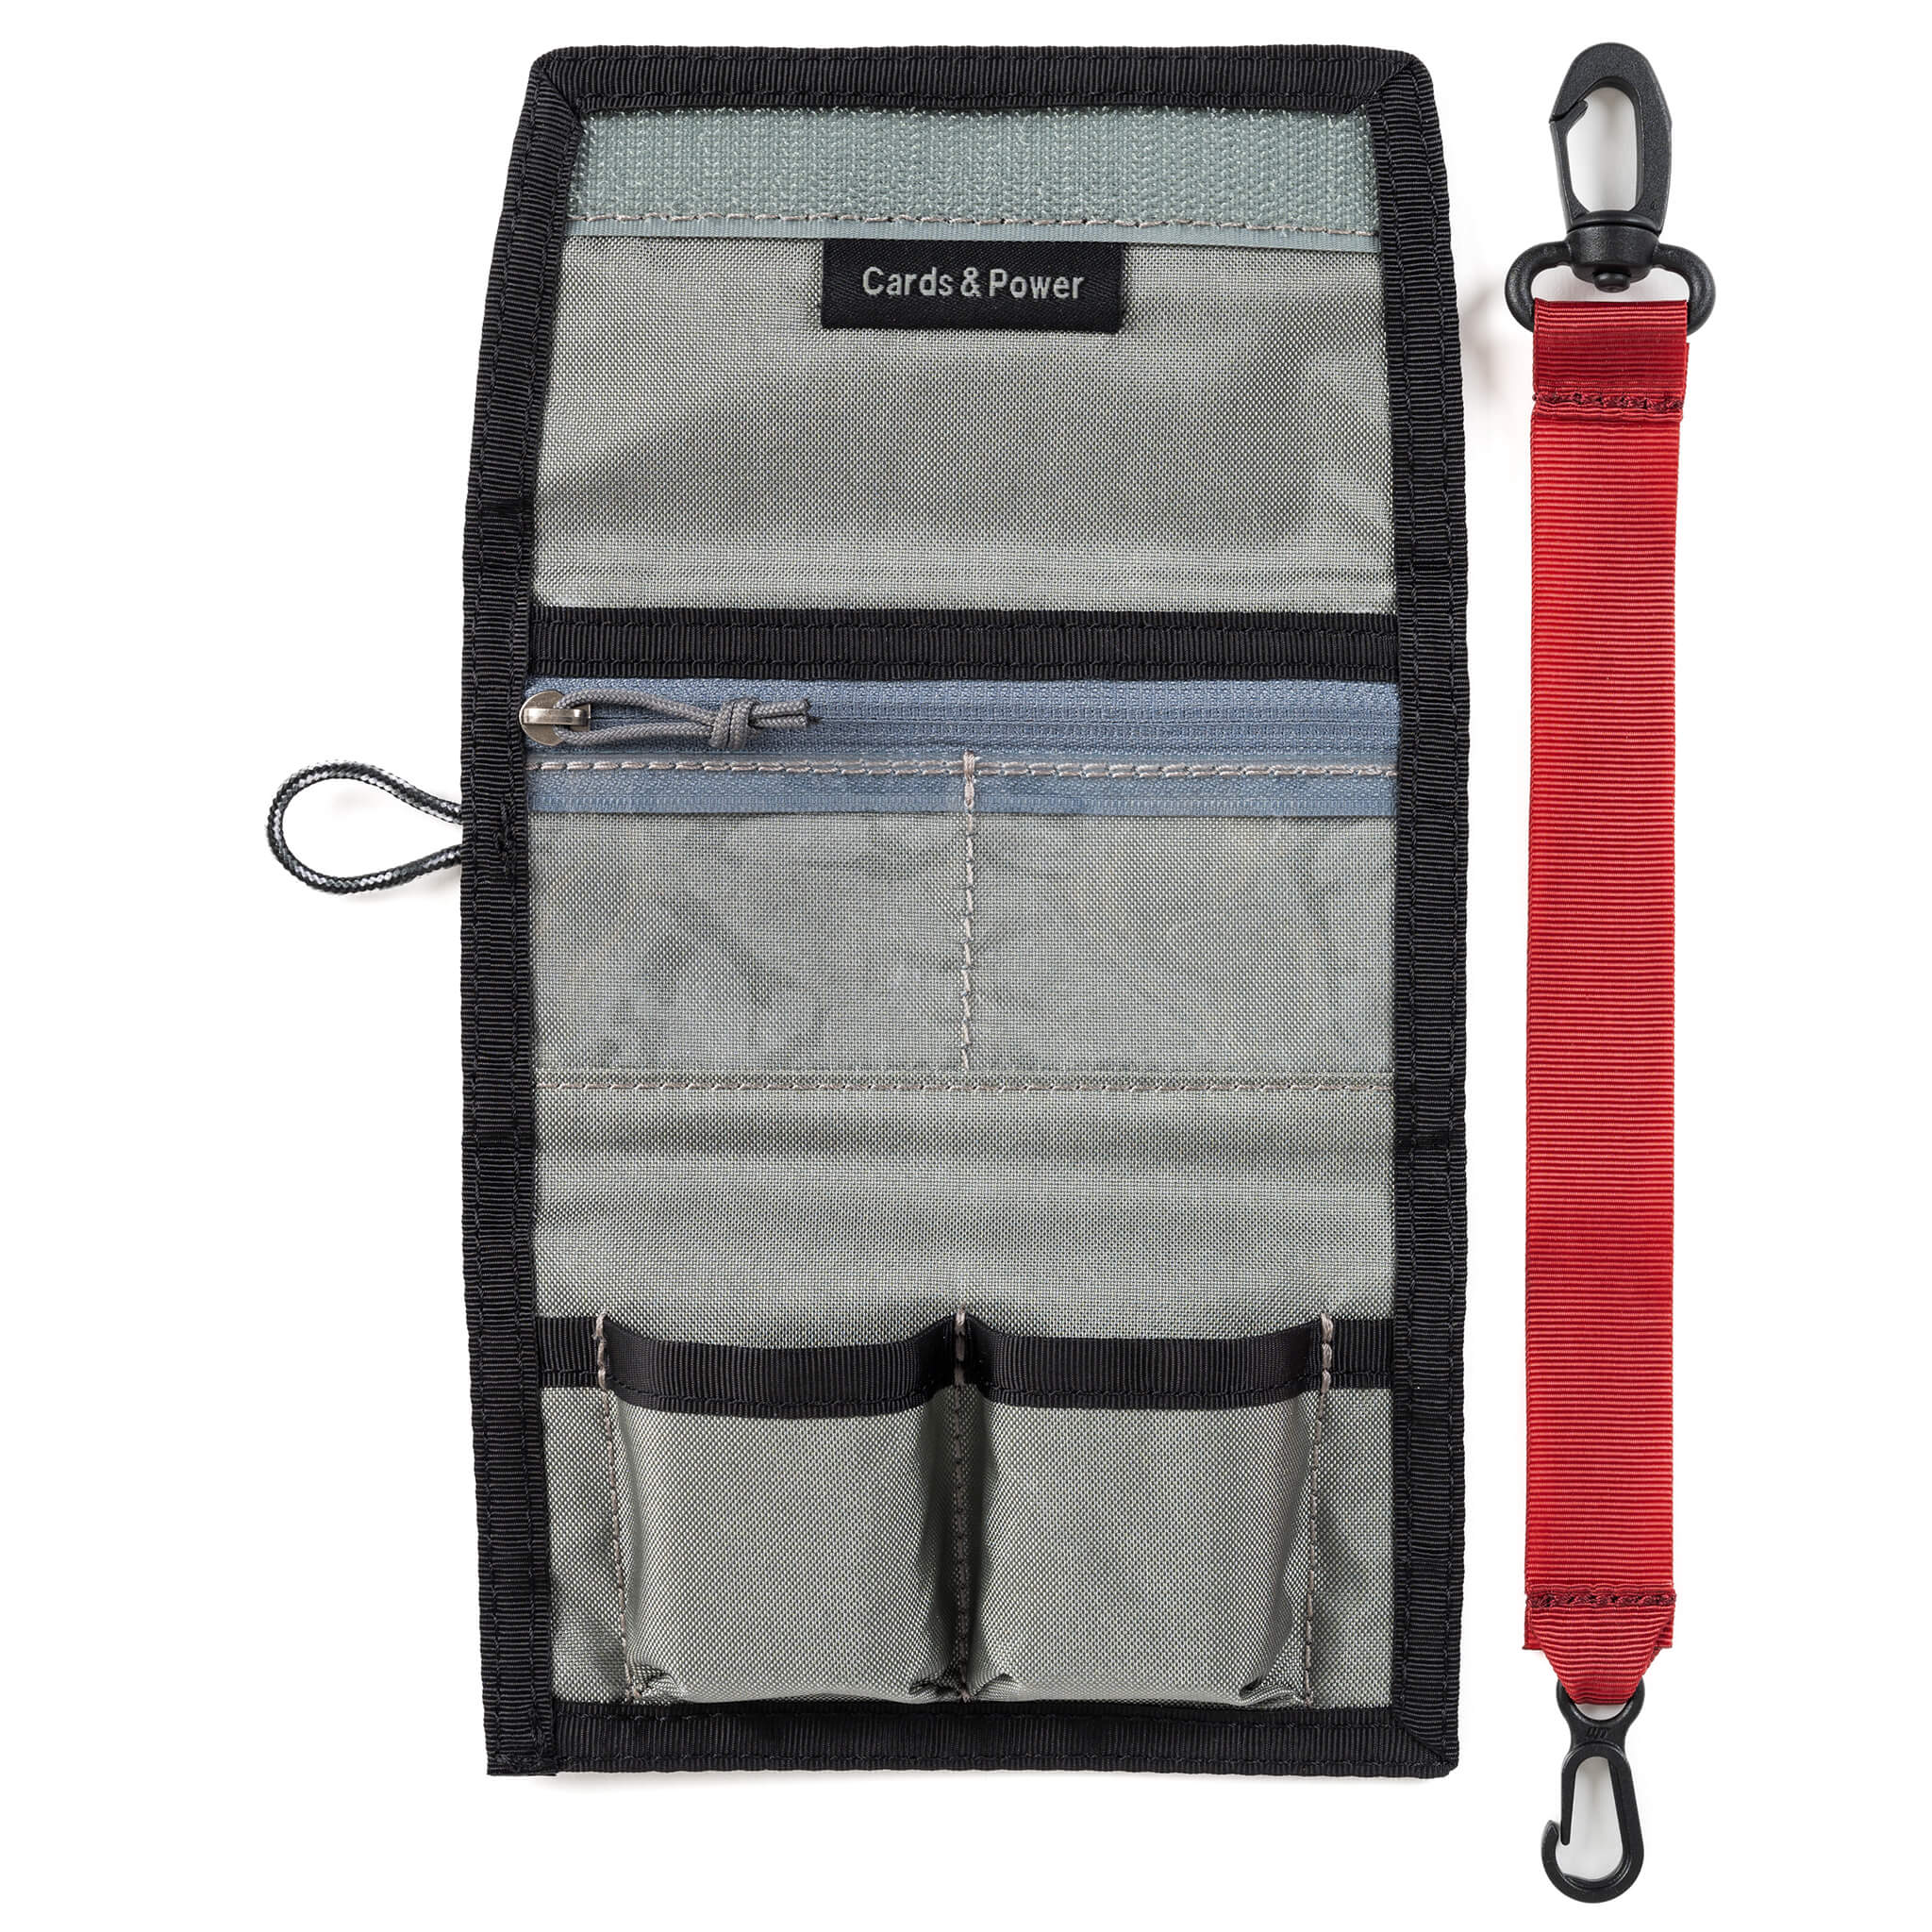 Pocket-sized with removable security lanyard and belt attachment